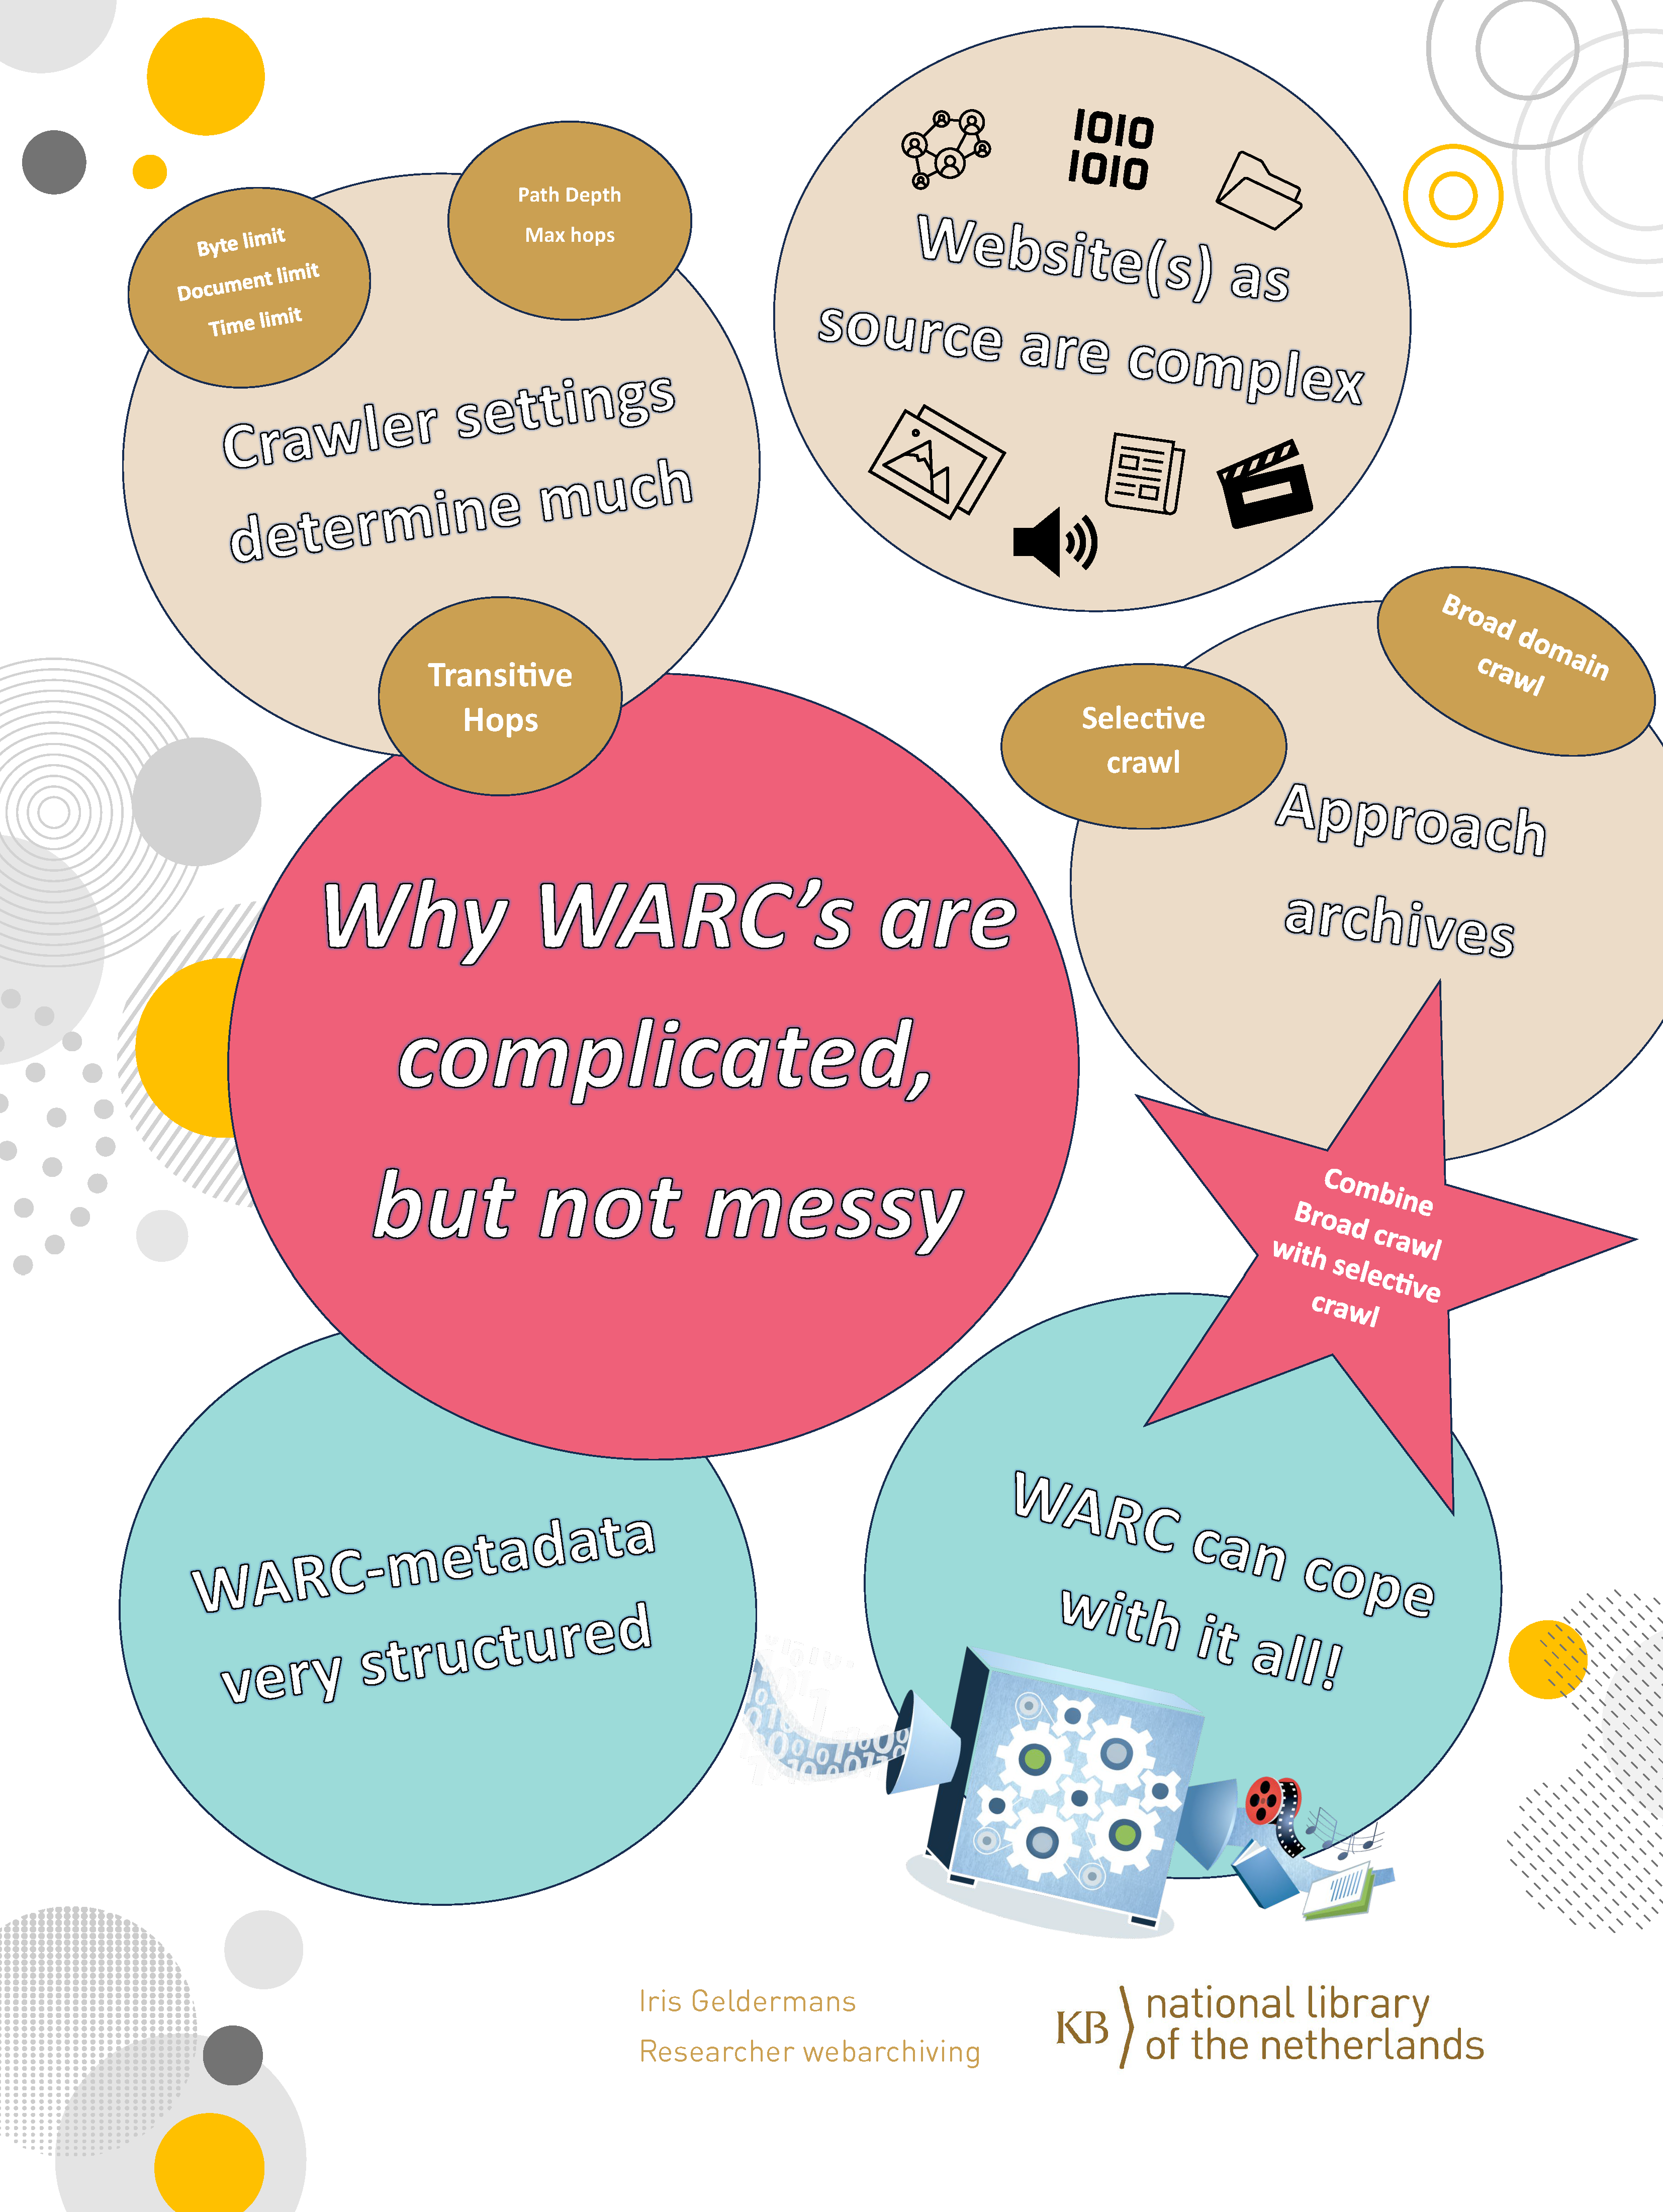 colourfull poster with arguments why WARC are complex but not messy